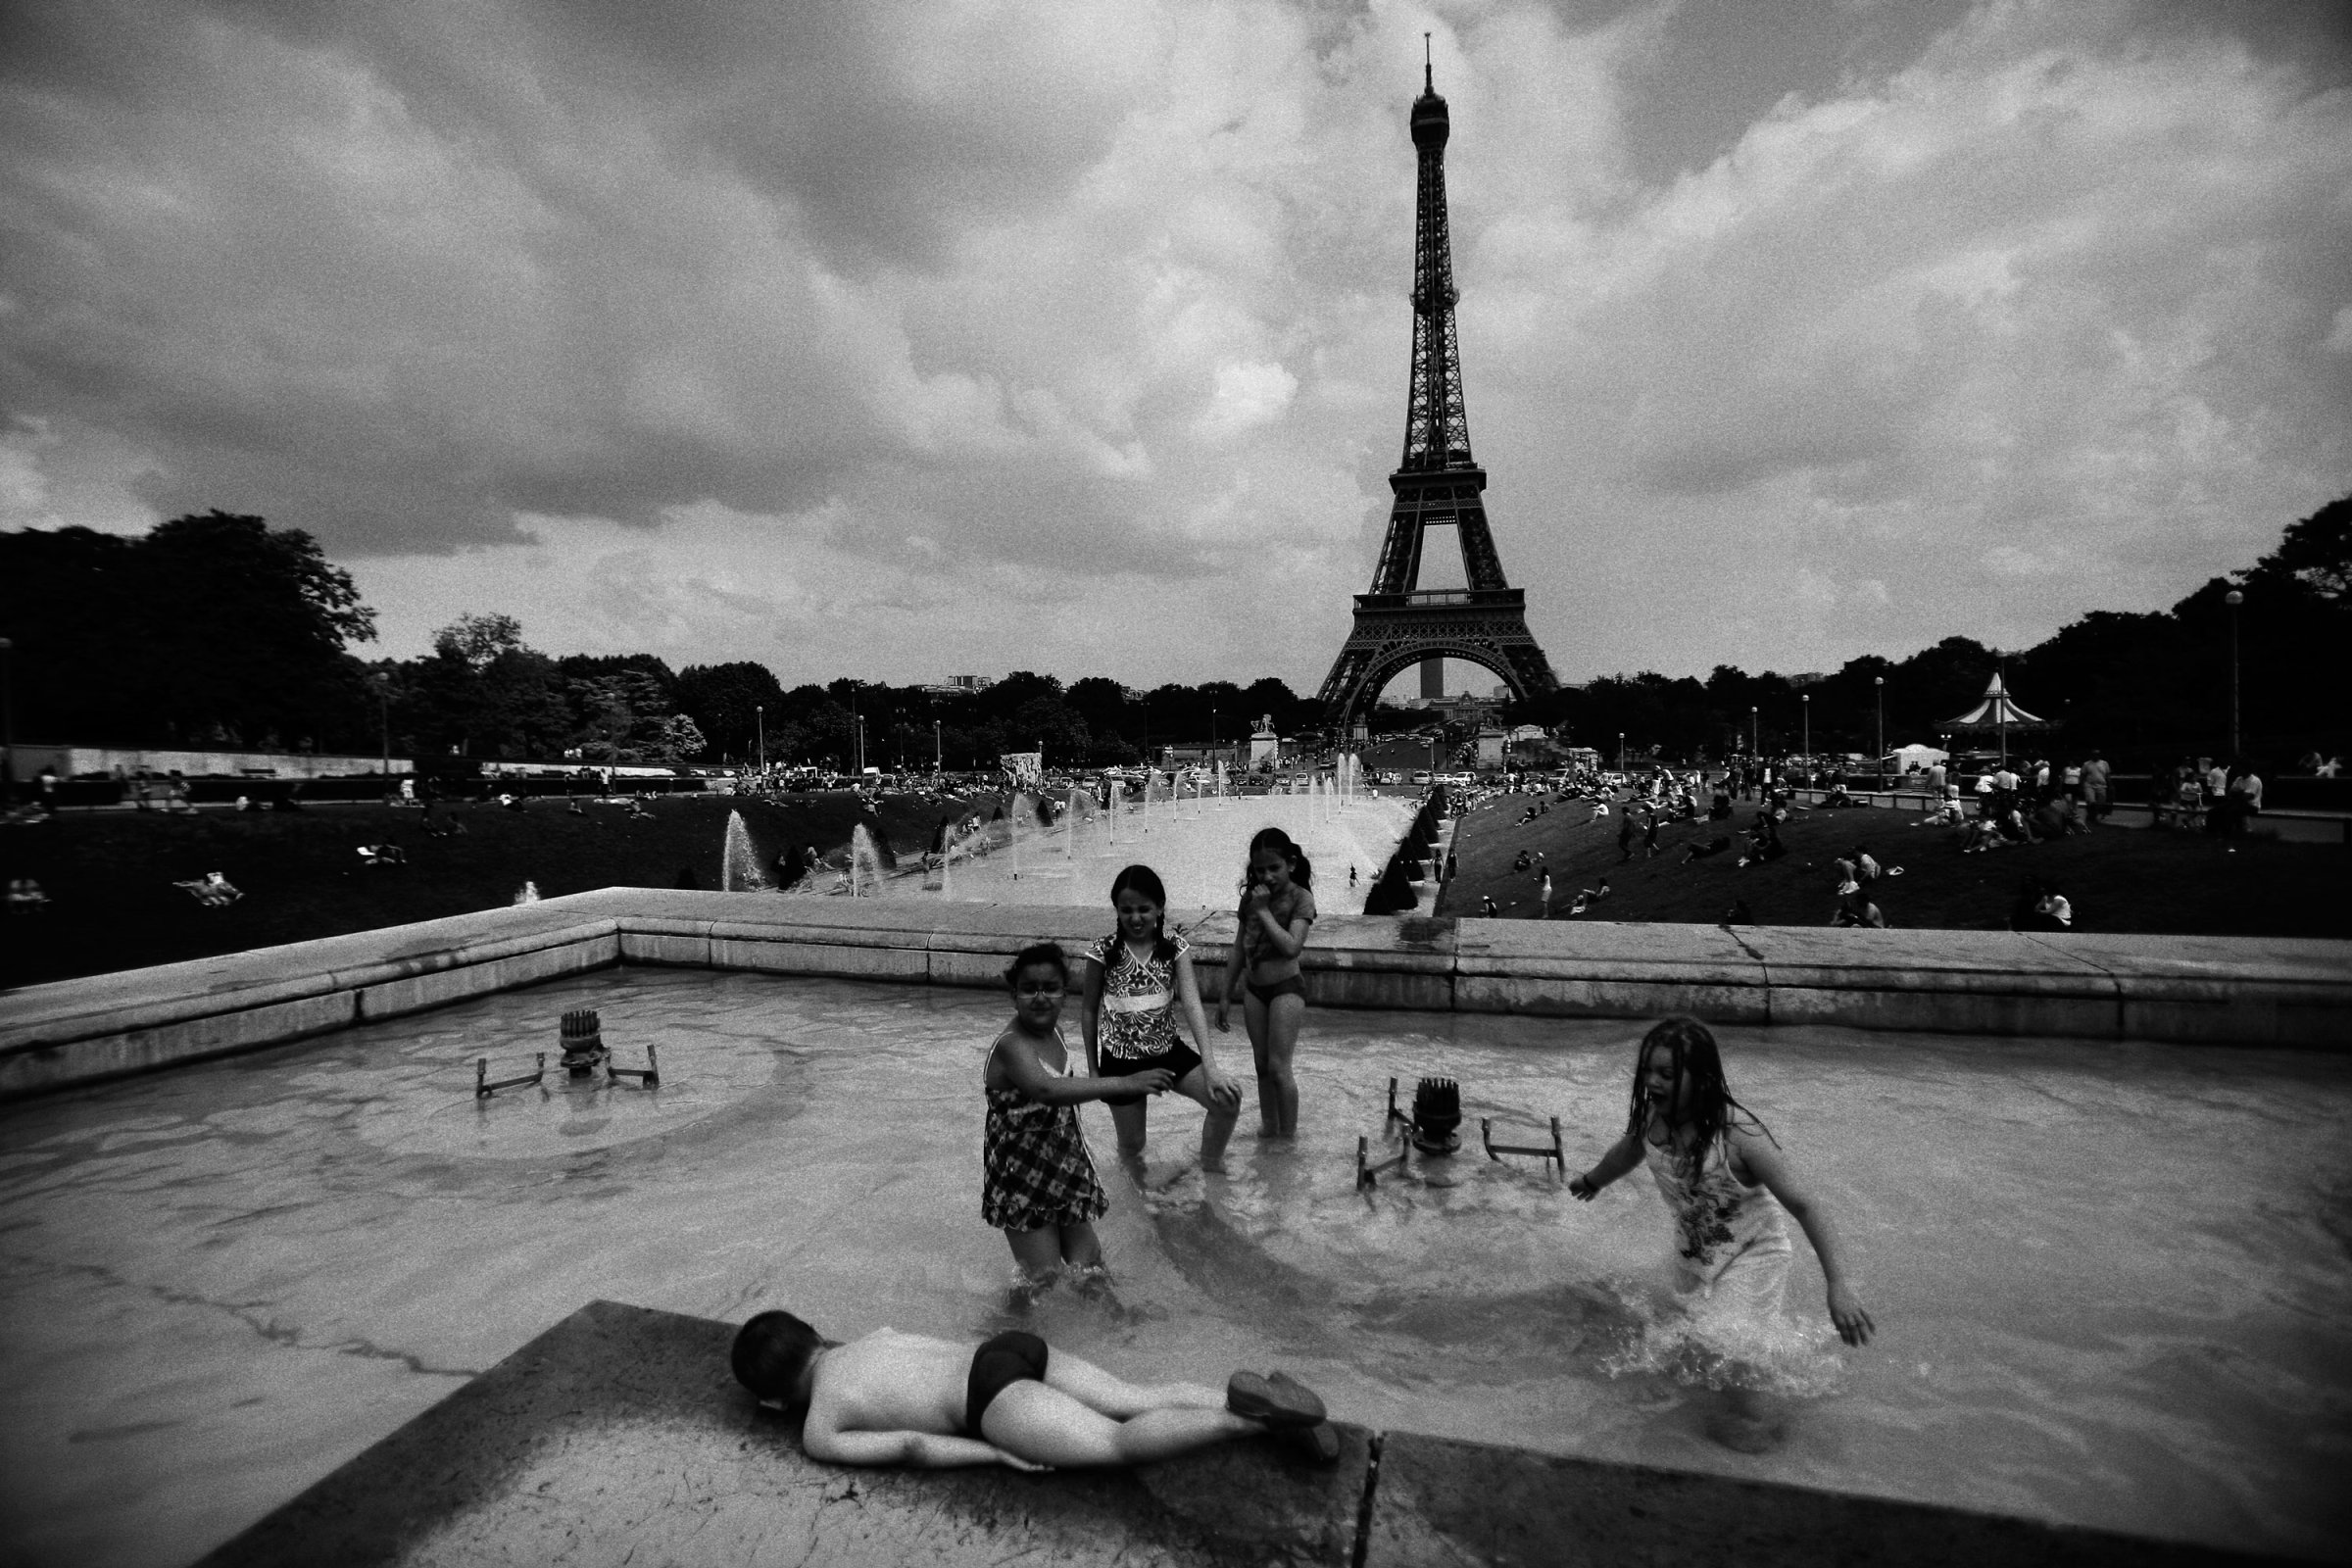 Children play in a fountain at Place du Trocadero in Paris on June 1, 2009.